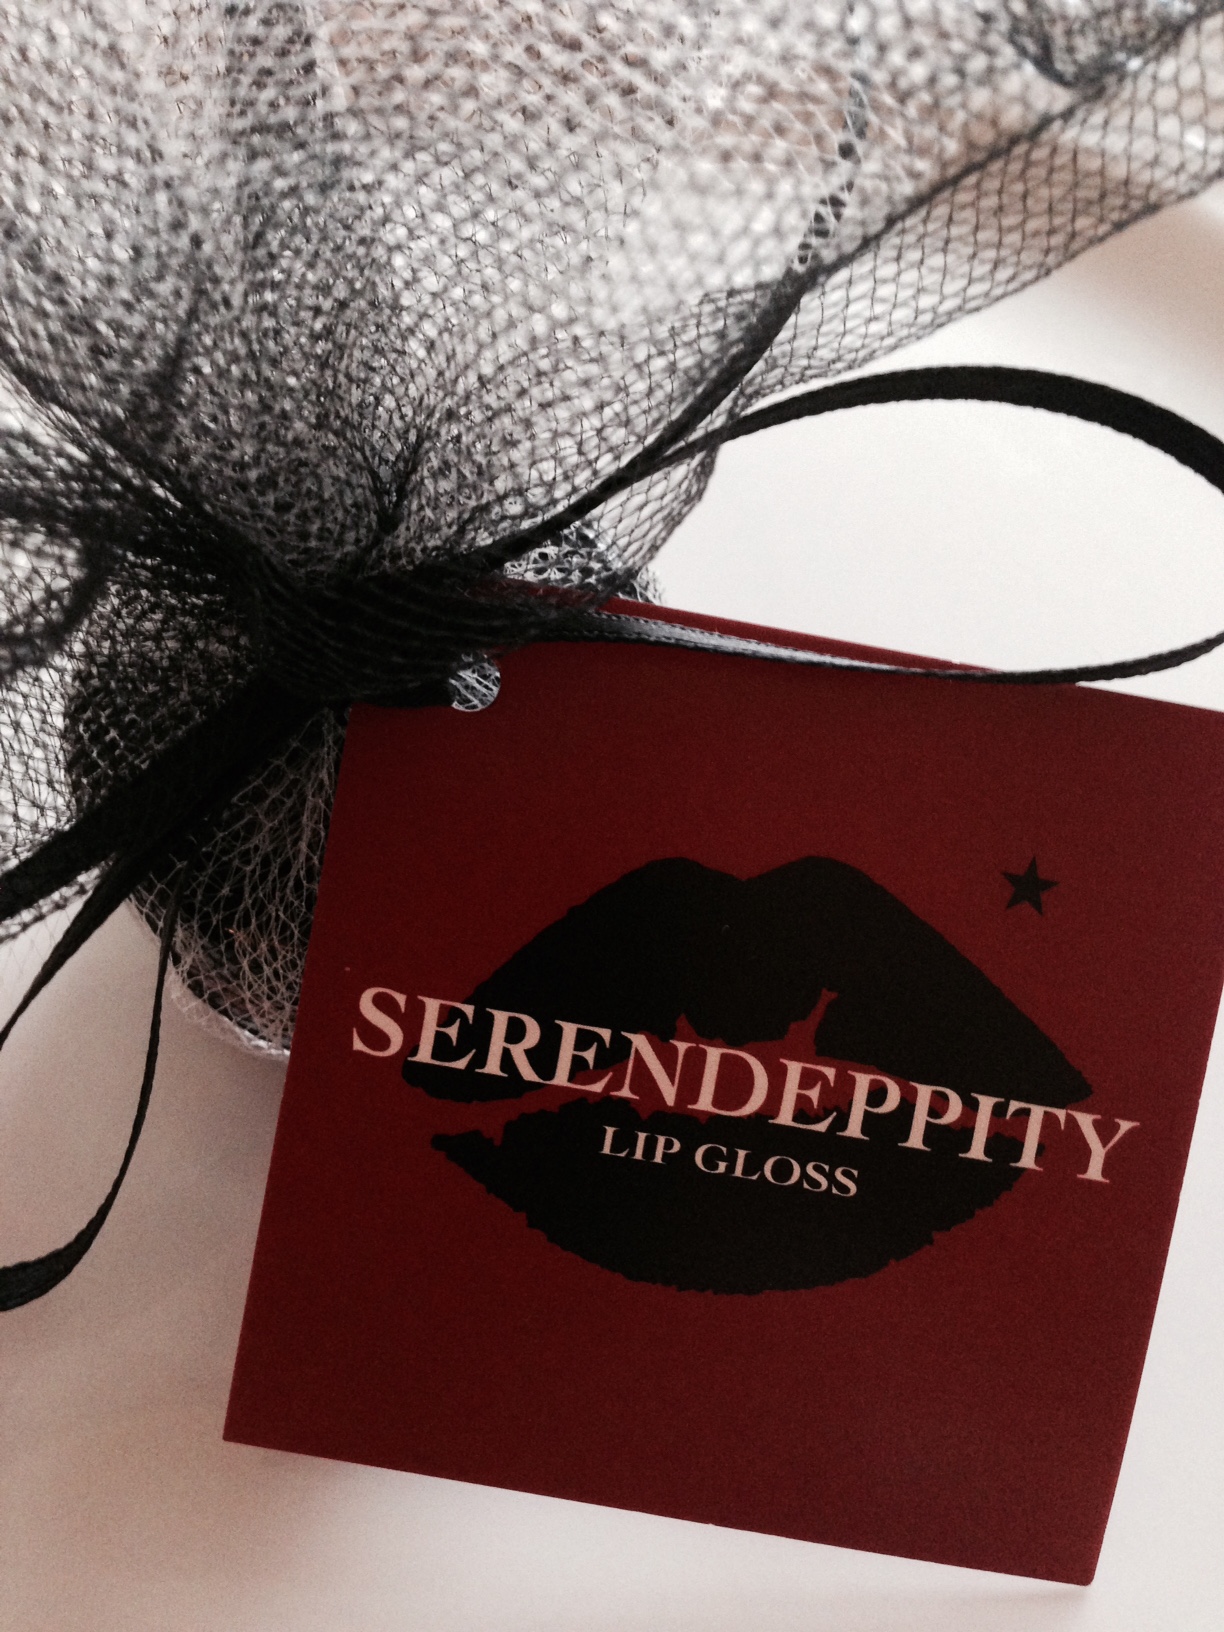 Limited Edition Packaging - Lip Glosses by Lori Depp for Serendeppity.